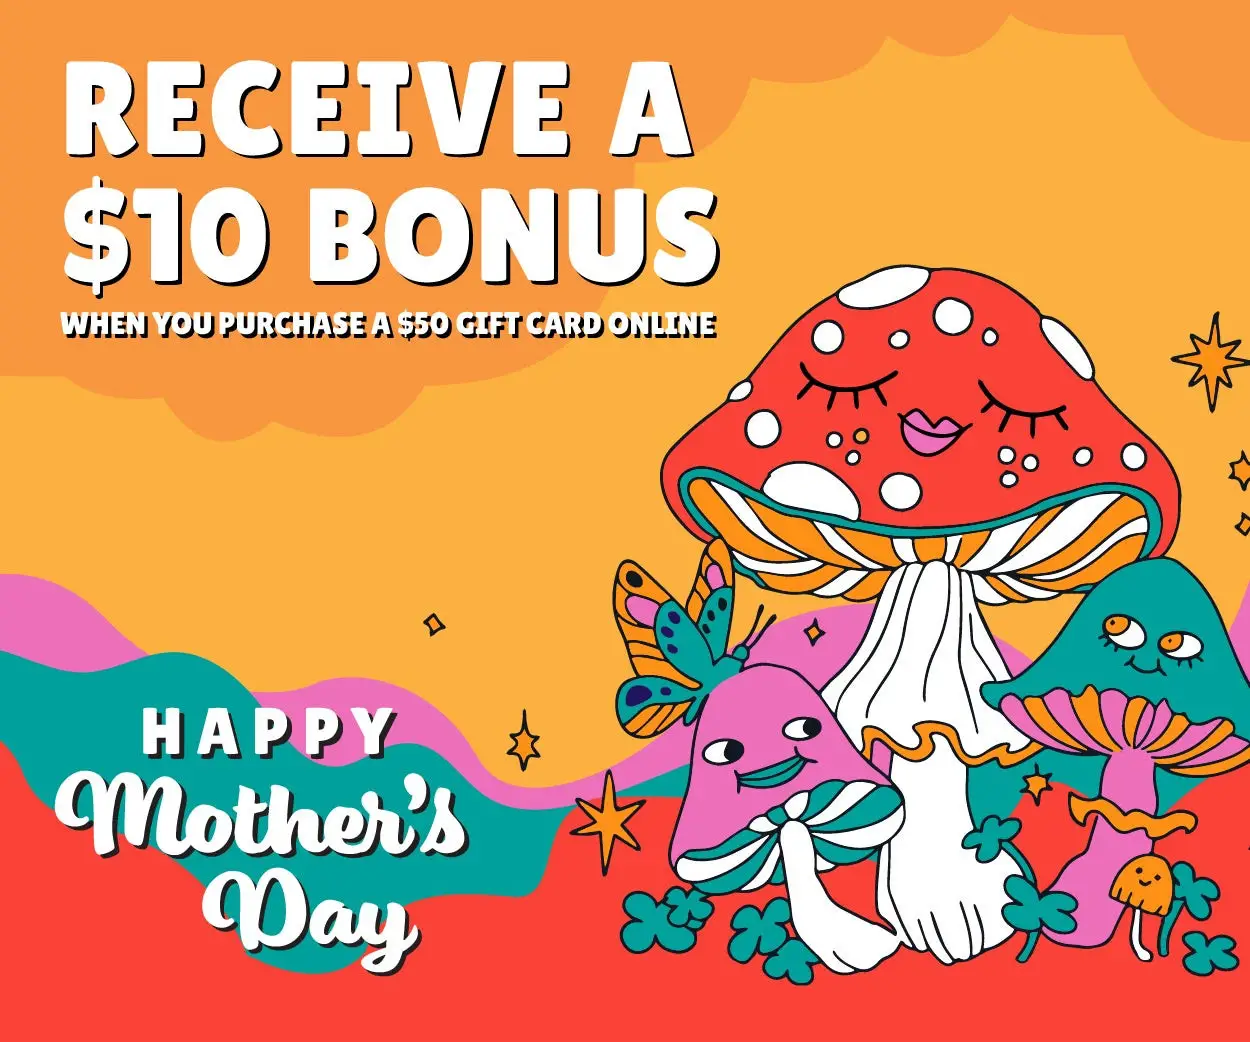 Mellow Mushroom Mothers Day [Mother's Day] Get a $10 Bonus Card When You Buy a $50 Gift Card Online